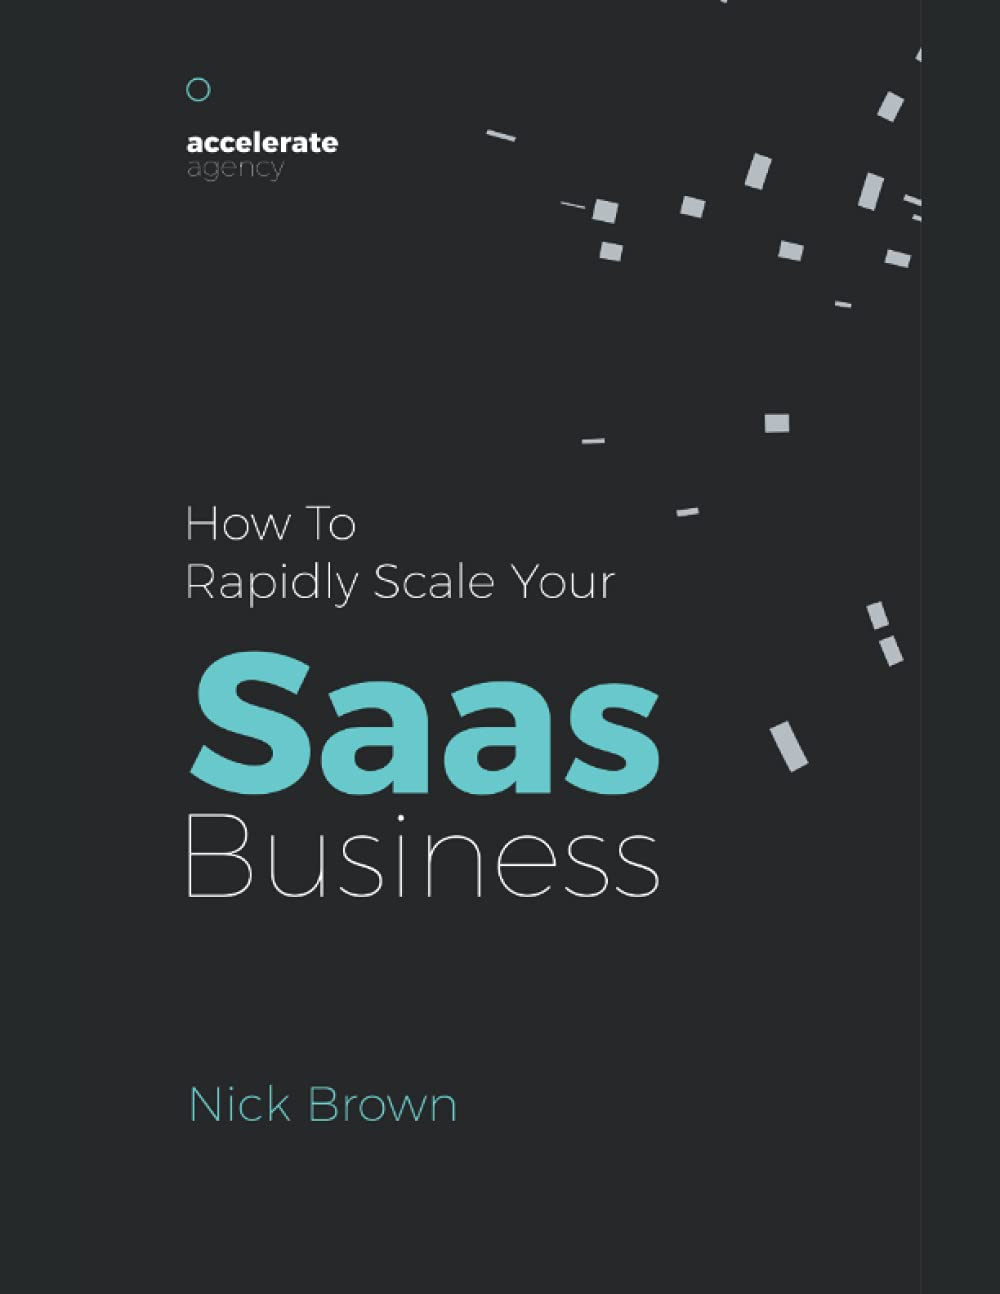 accelerate agency: How to Rapidly Scale your SaaS Business